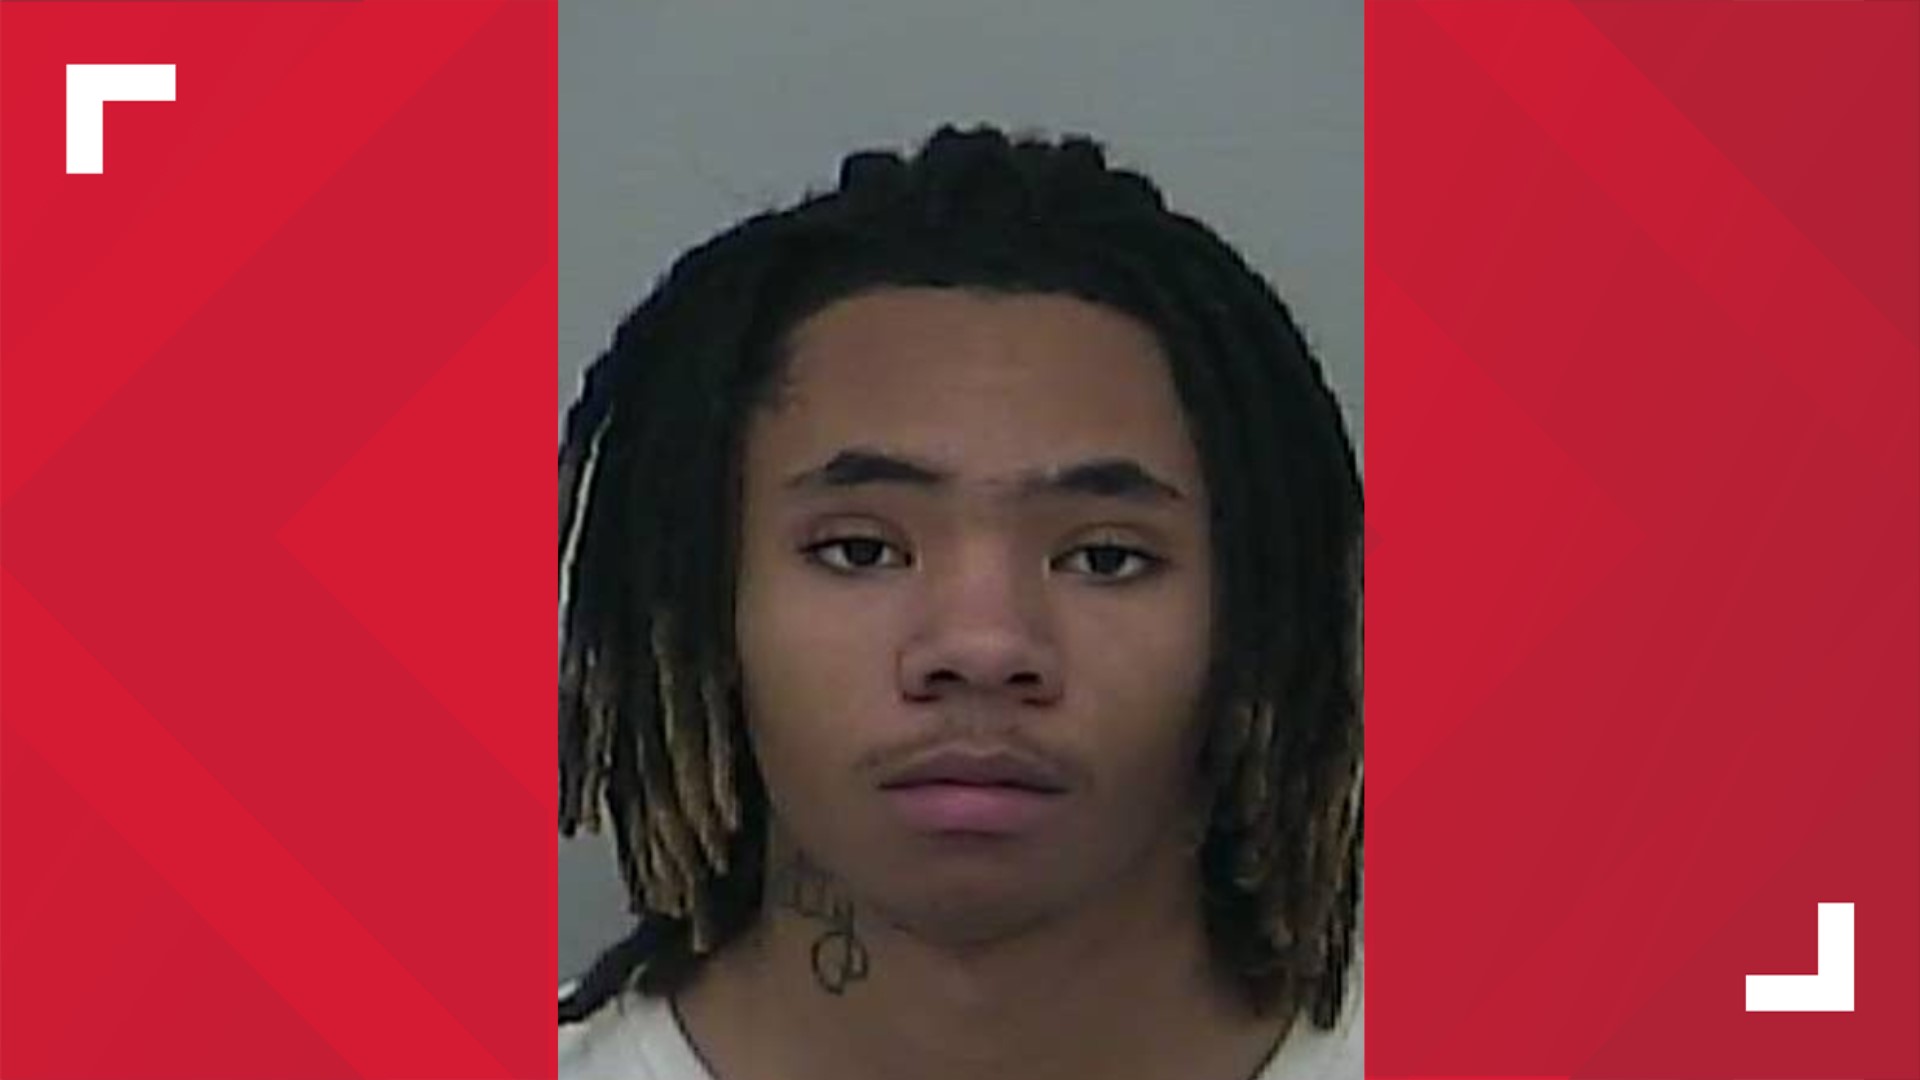 Dajae May was found guilty of numerous violent offenses, including aggravated robbery and kidnapping, according to the Delaware County Prosecutor's Office.